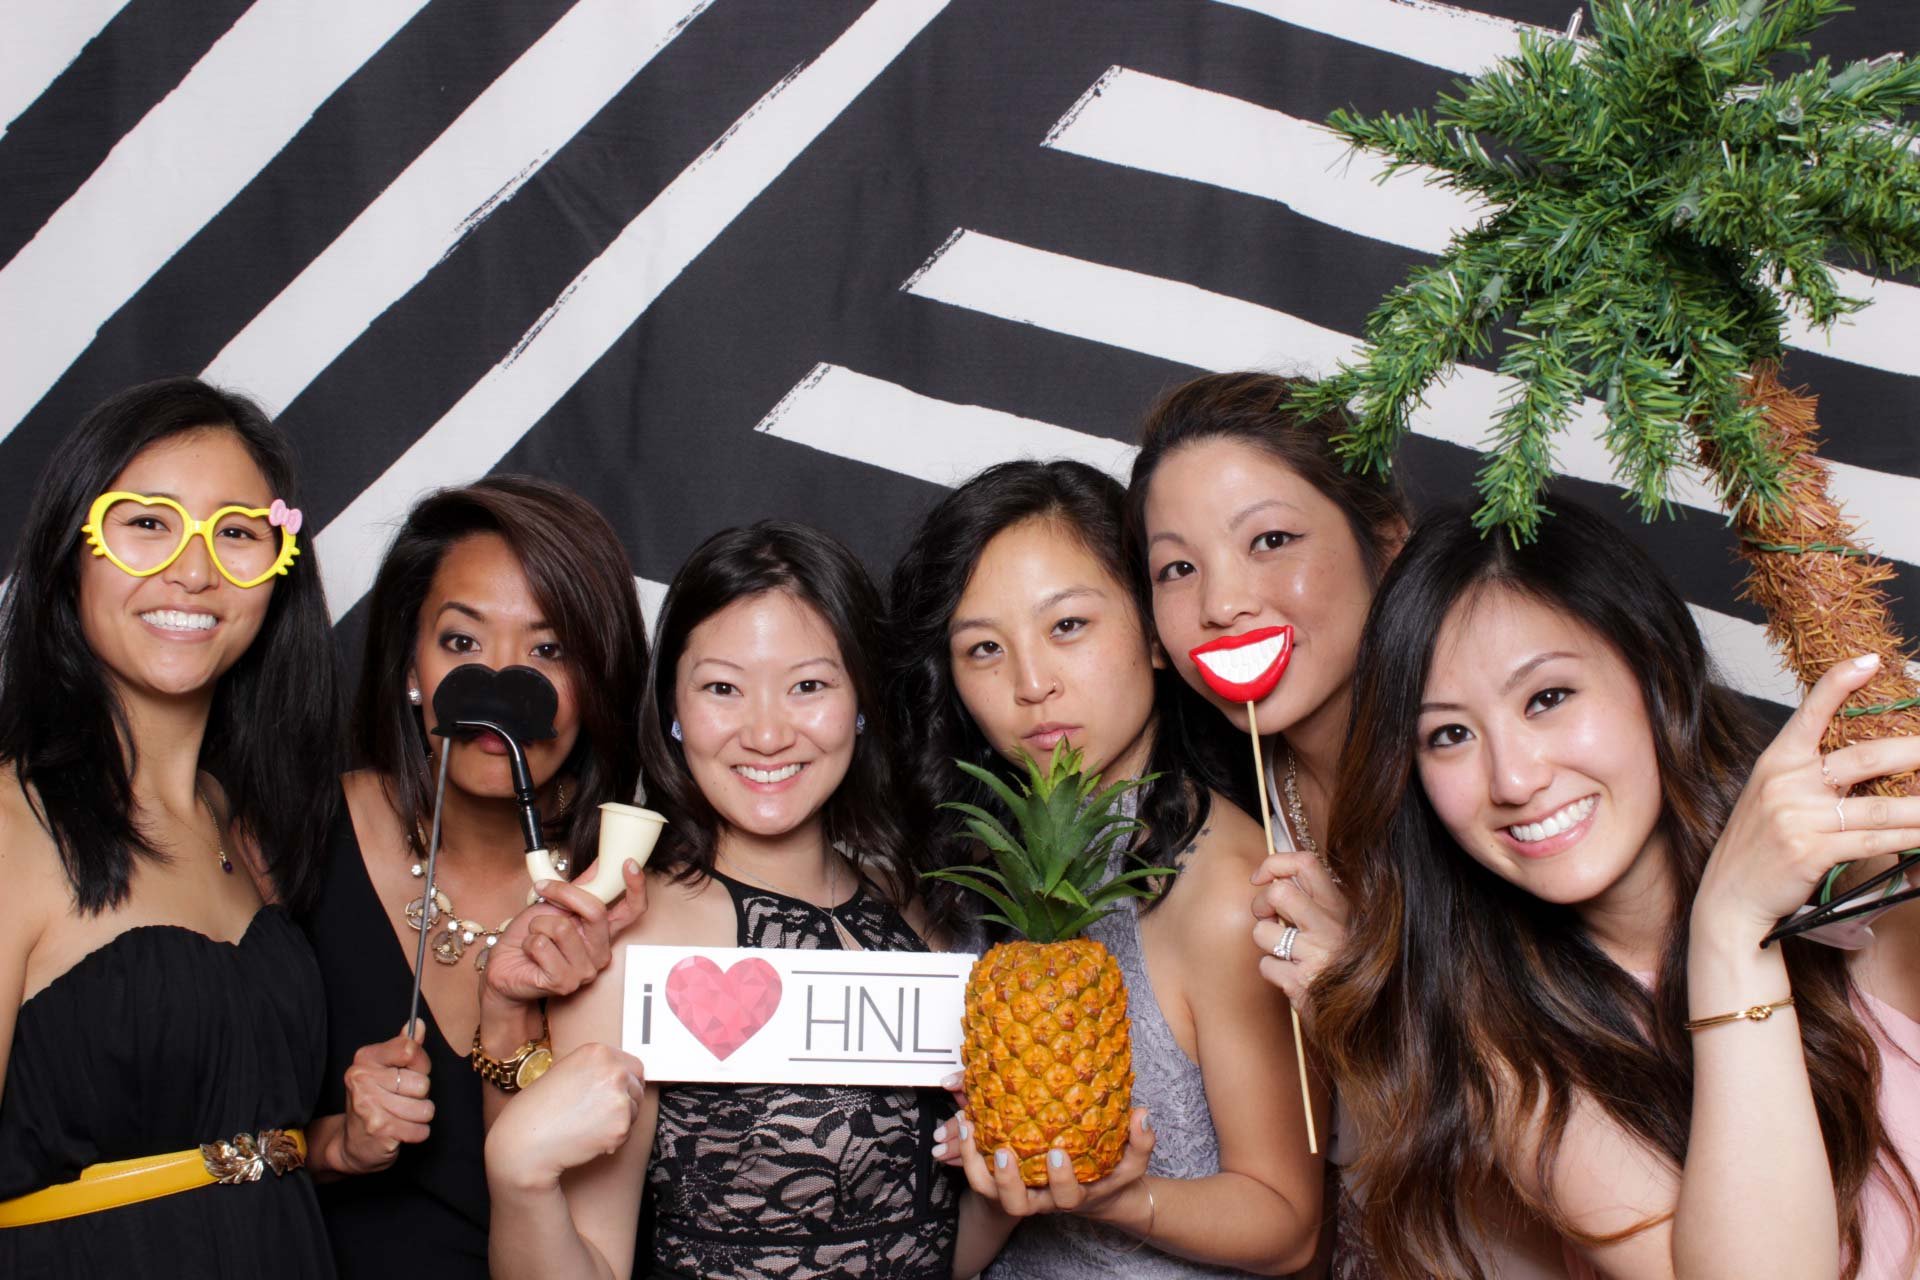 Hawaii wedding party photobooth prices cost packages oahu hawaii (25).JPG